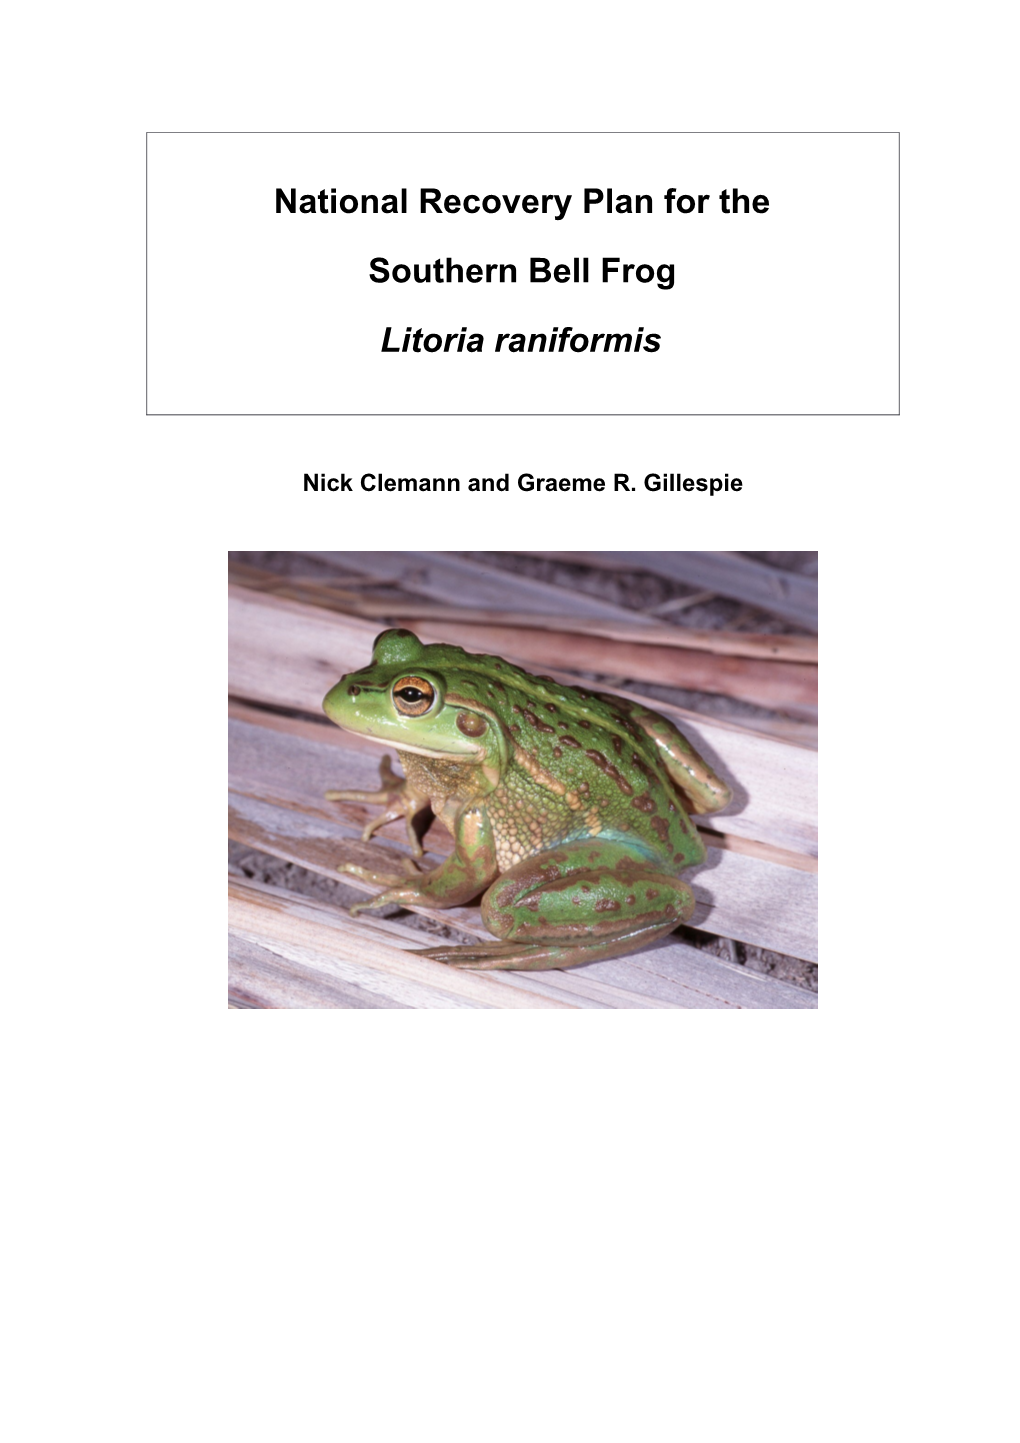 National Recovery Plan for the Southern Bell Frog Litoria Raniformis